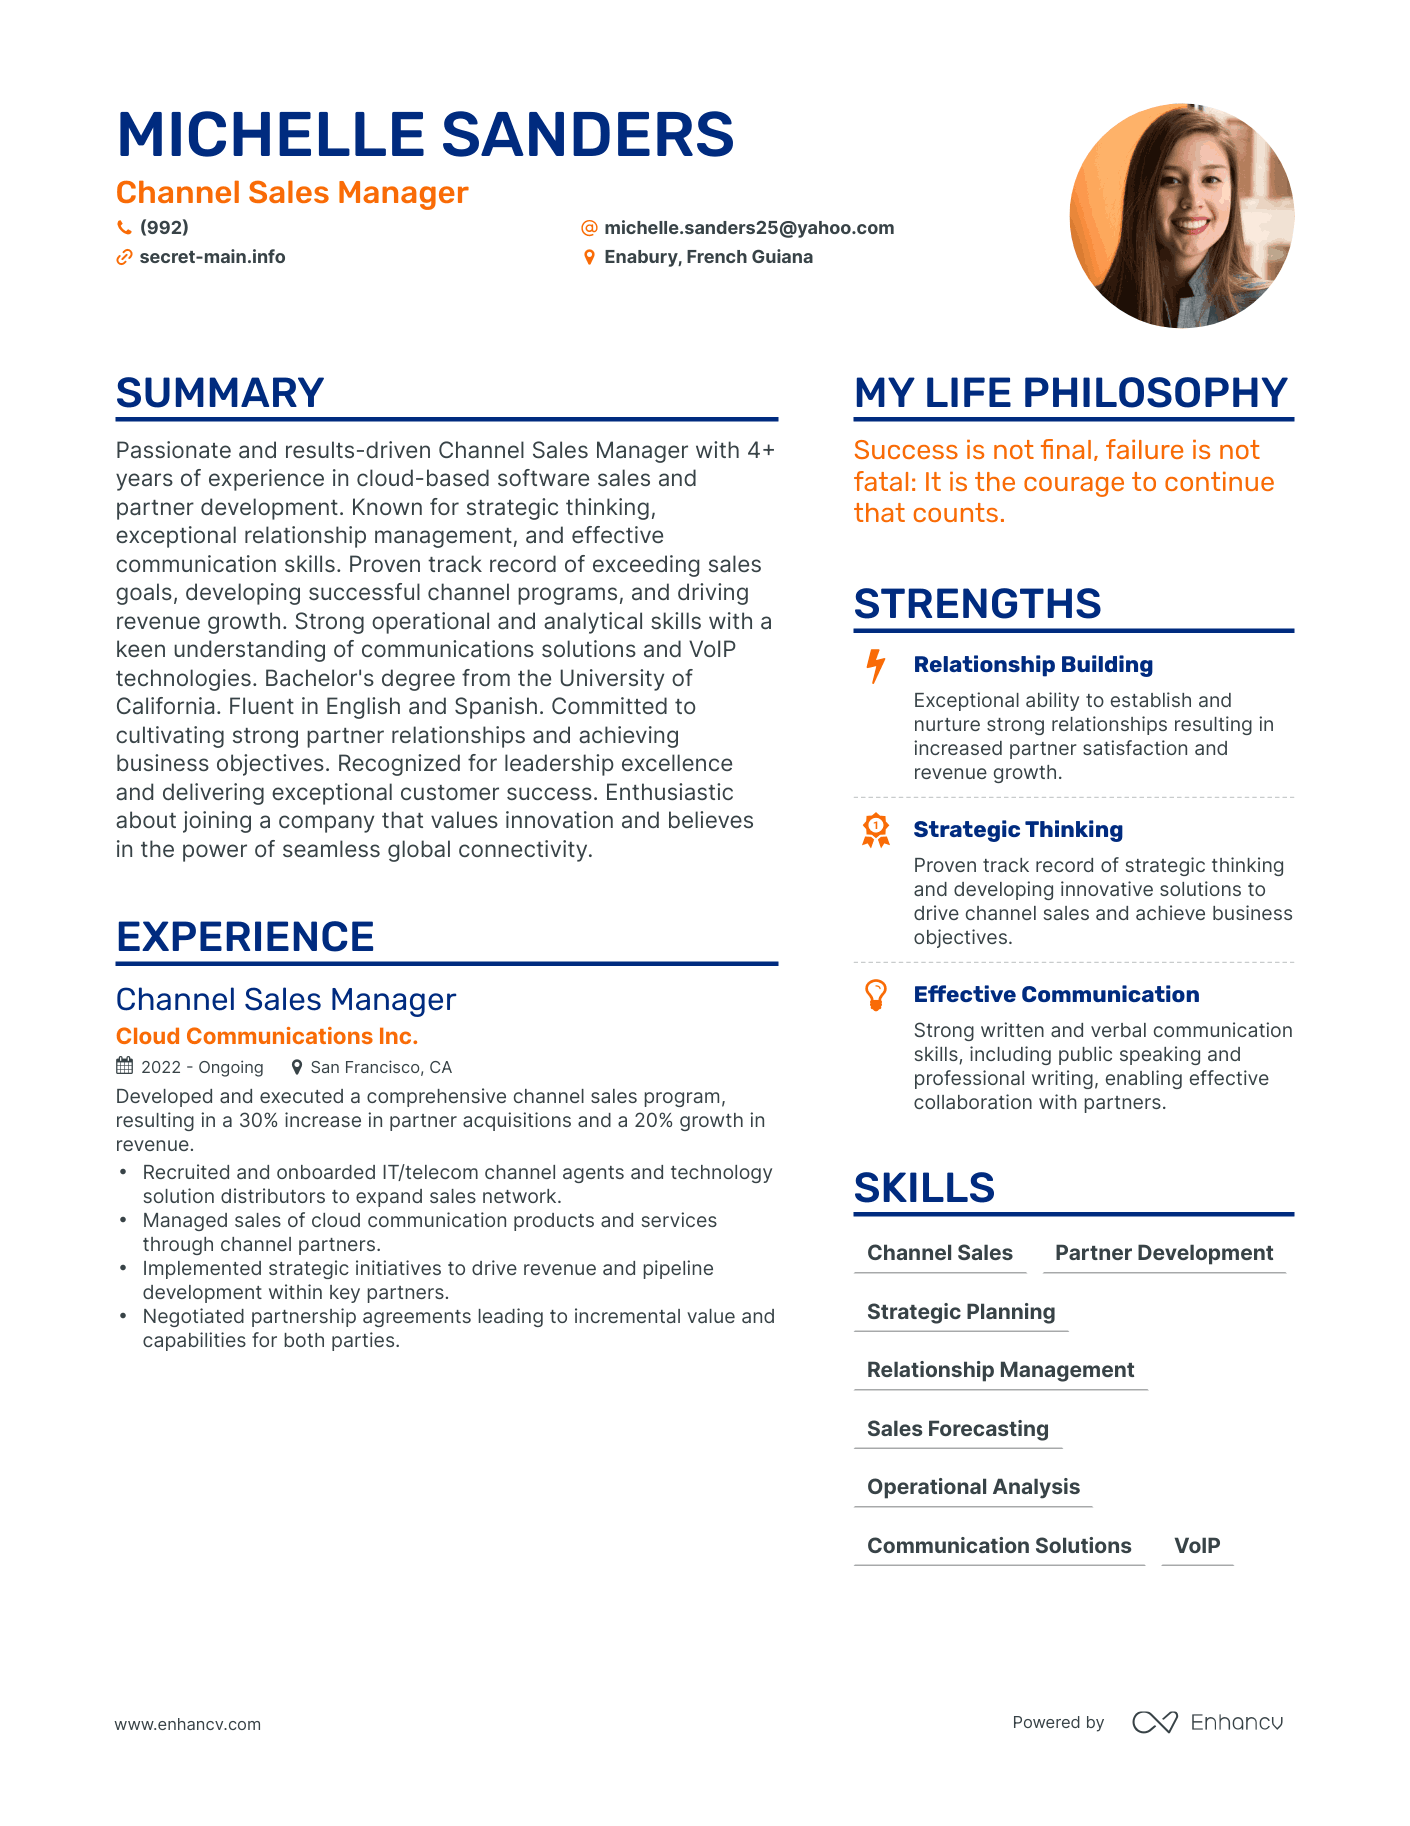 Channel Sales Manager resume example